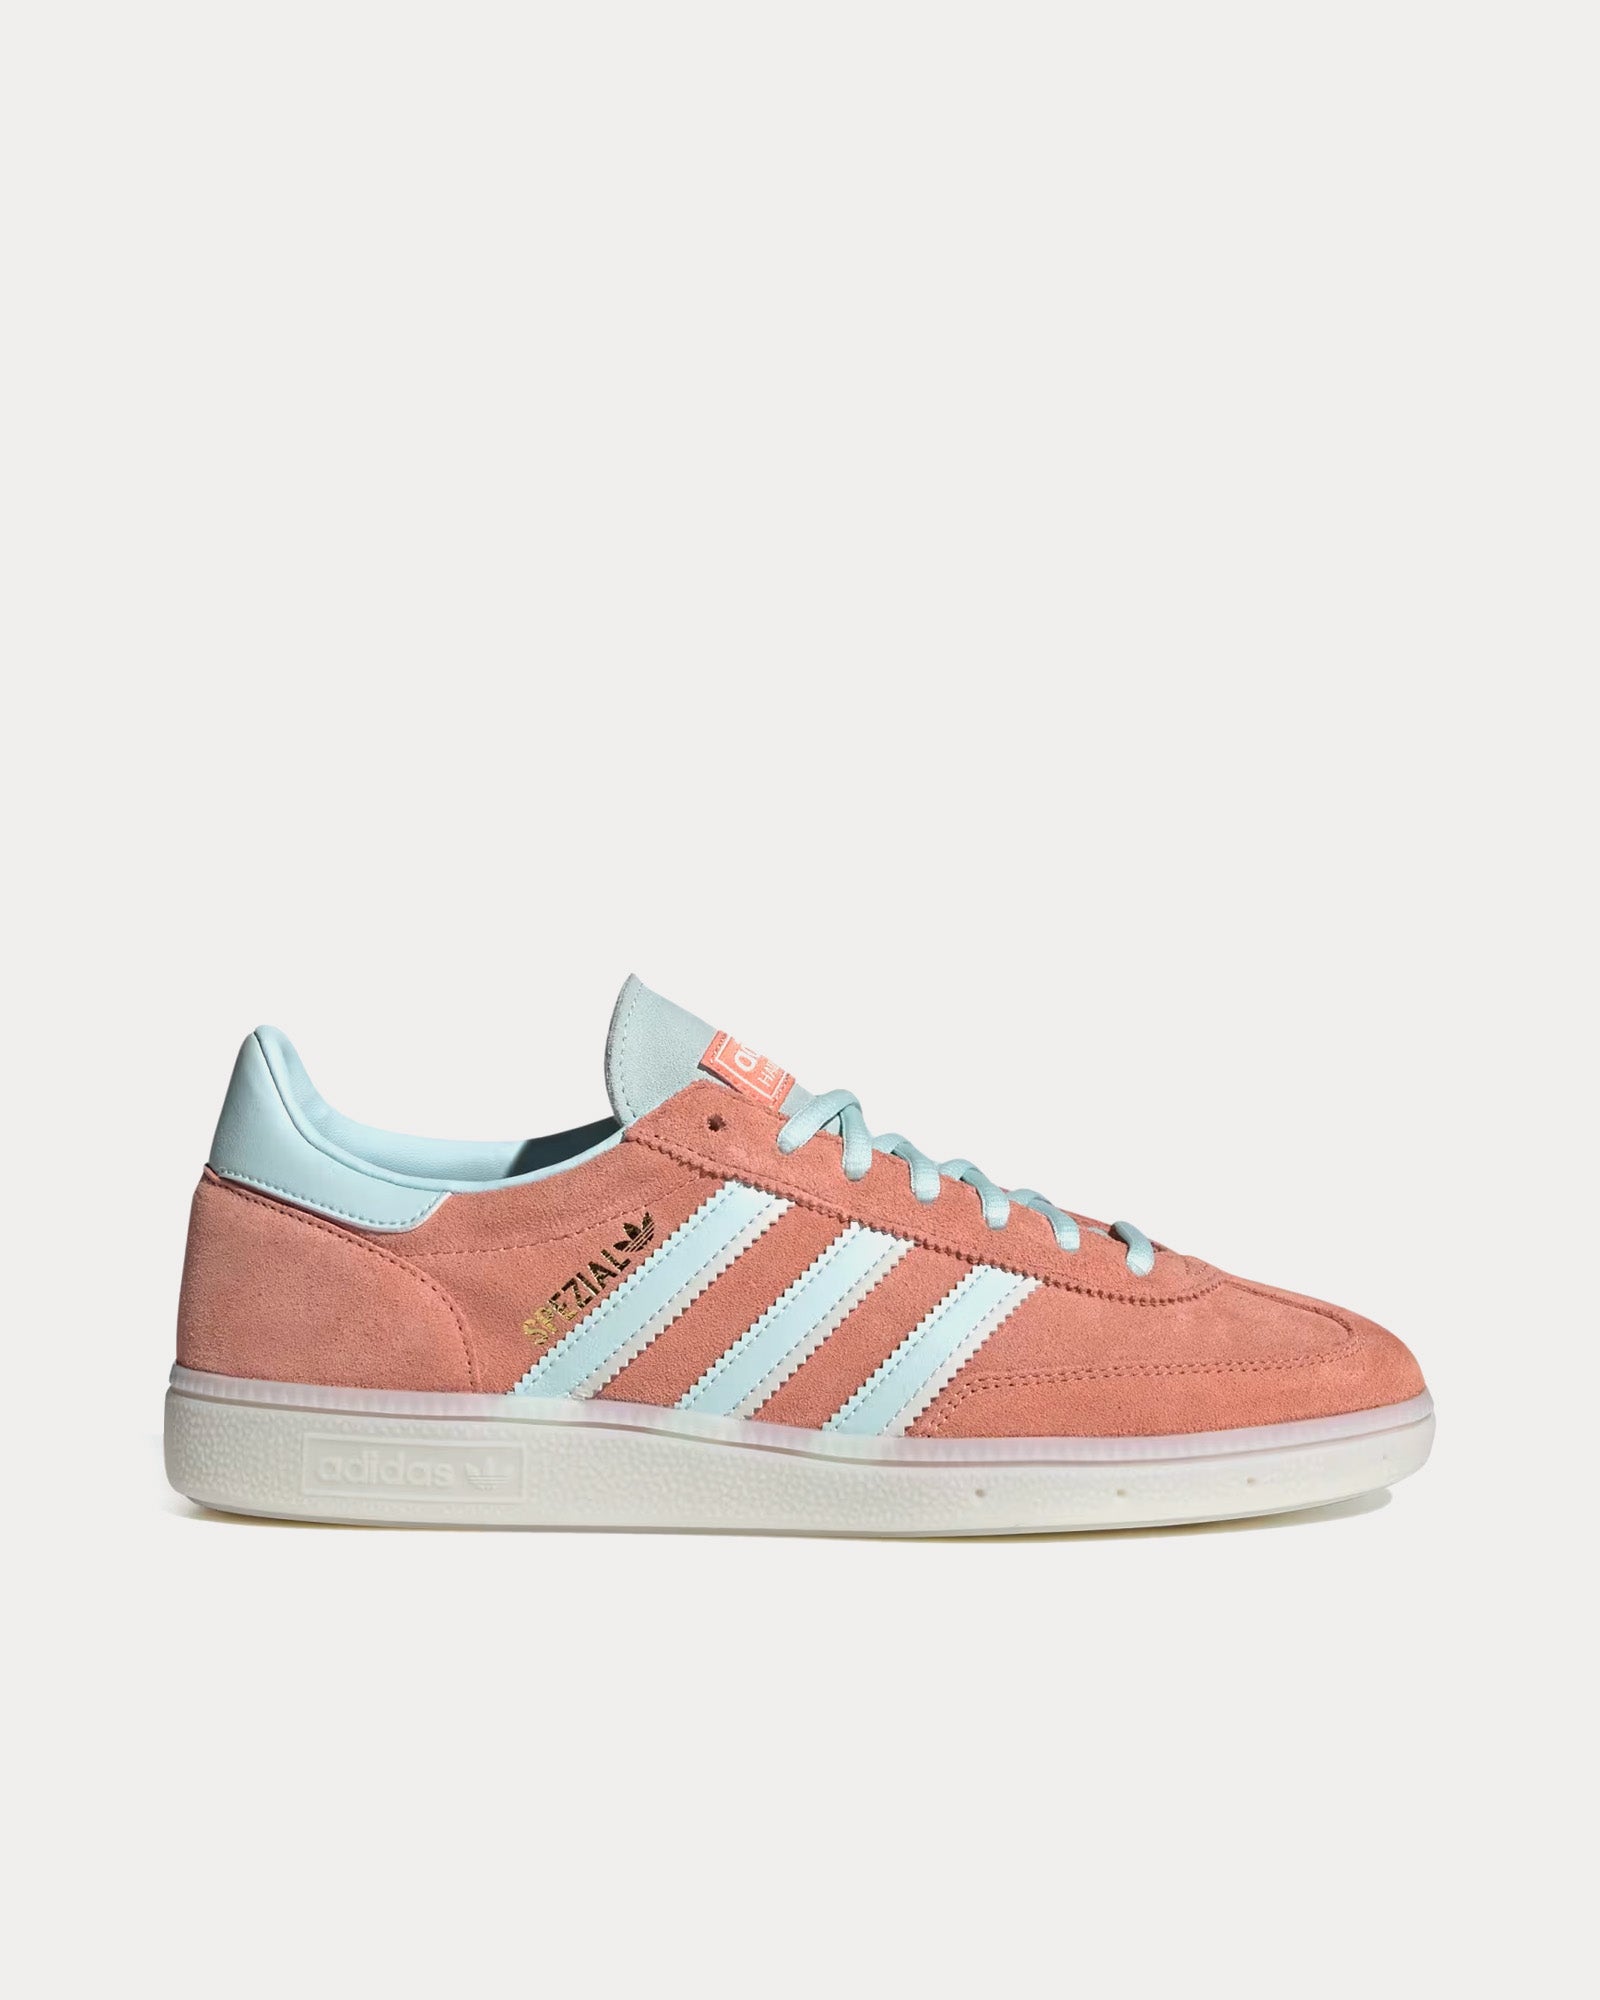 Adidas - Handball Spezial Wonder Clay / Almost Blue / Crystal White Low Top Sneakers